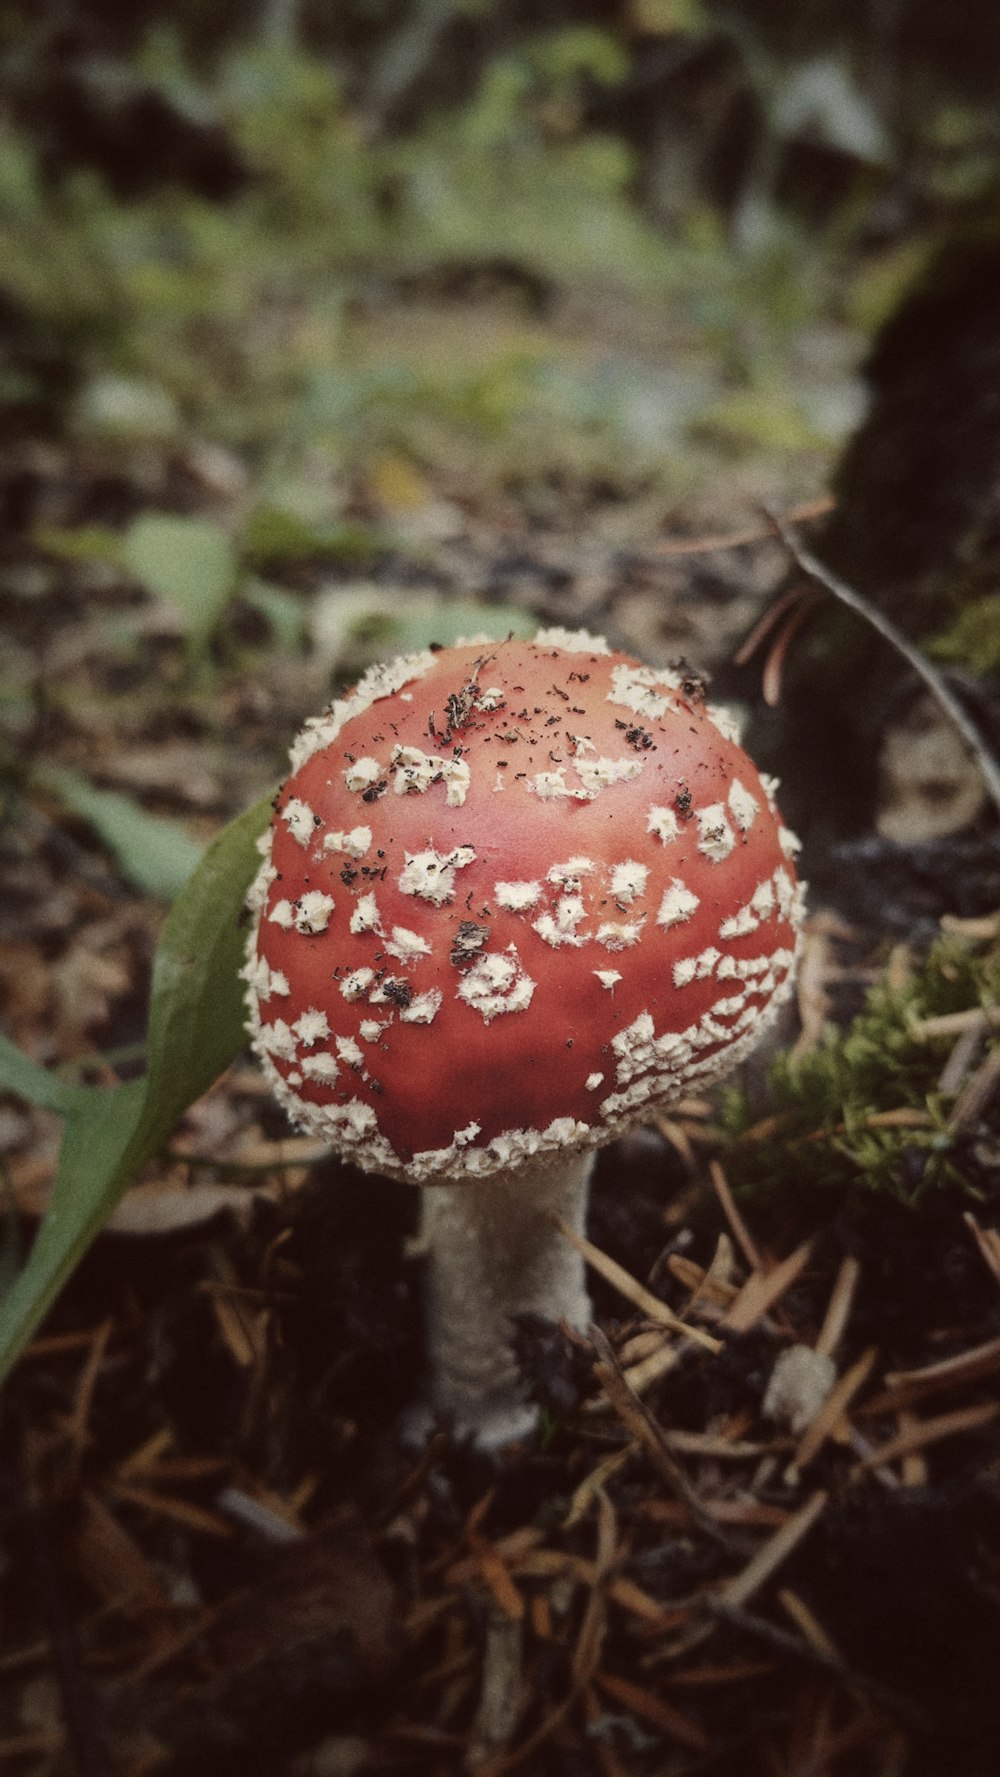 a small red mushroom with white flowers on it